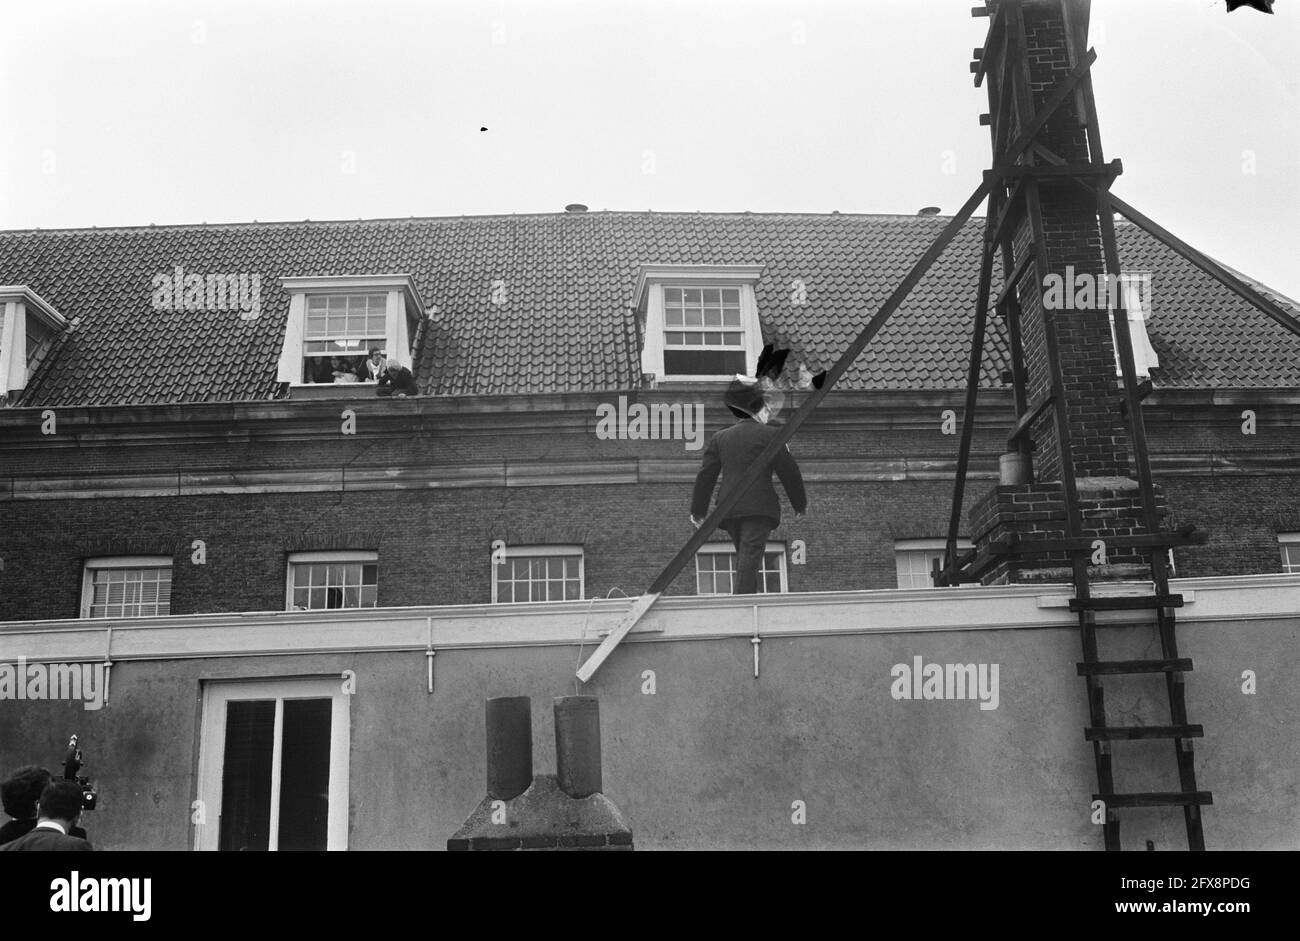 Occupation Maagdenhuis Amsterdam, by student police on roof Maagdenhuis, looking out the windows occupiers, 20 May 1969, POLICE, occupations, students, The Netherlands, 20th century press agency photo, news to remember, documentary, historic photography 1945-1990, visual stories, human history of the Twentieth Century, capturing moments in time Stock Photo